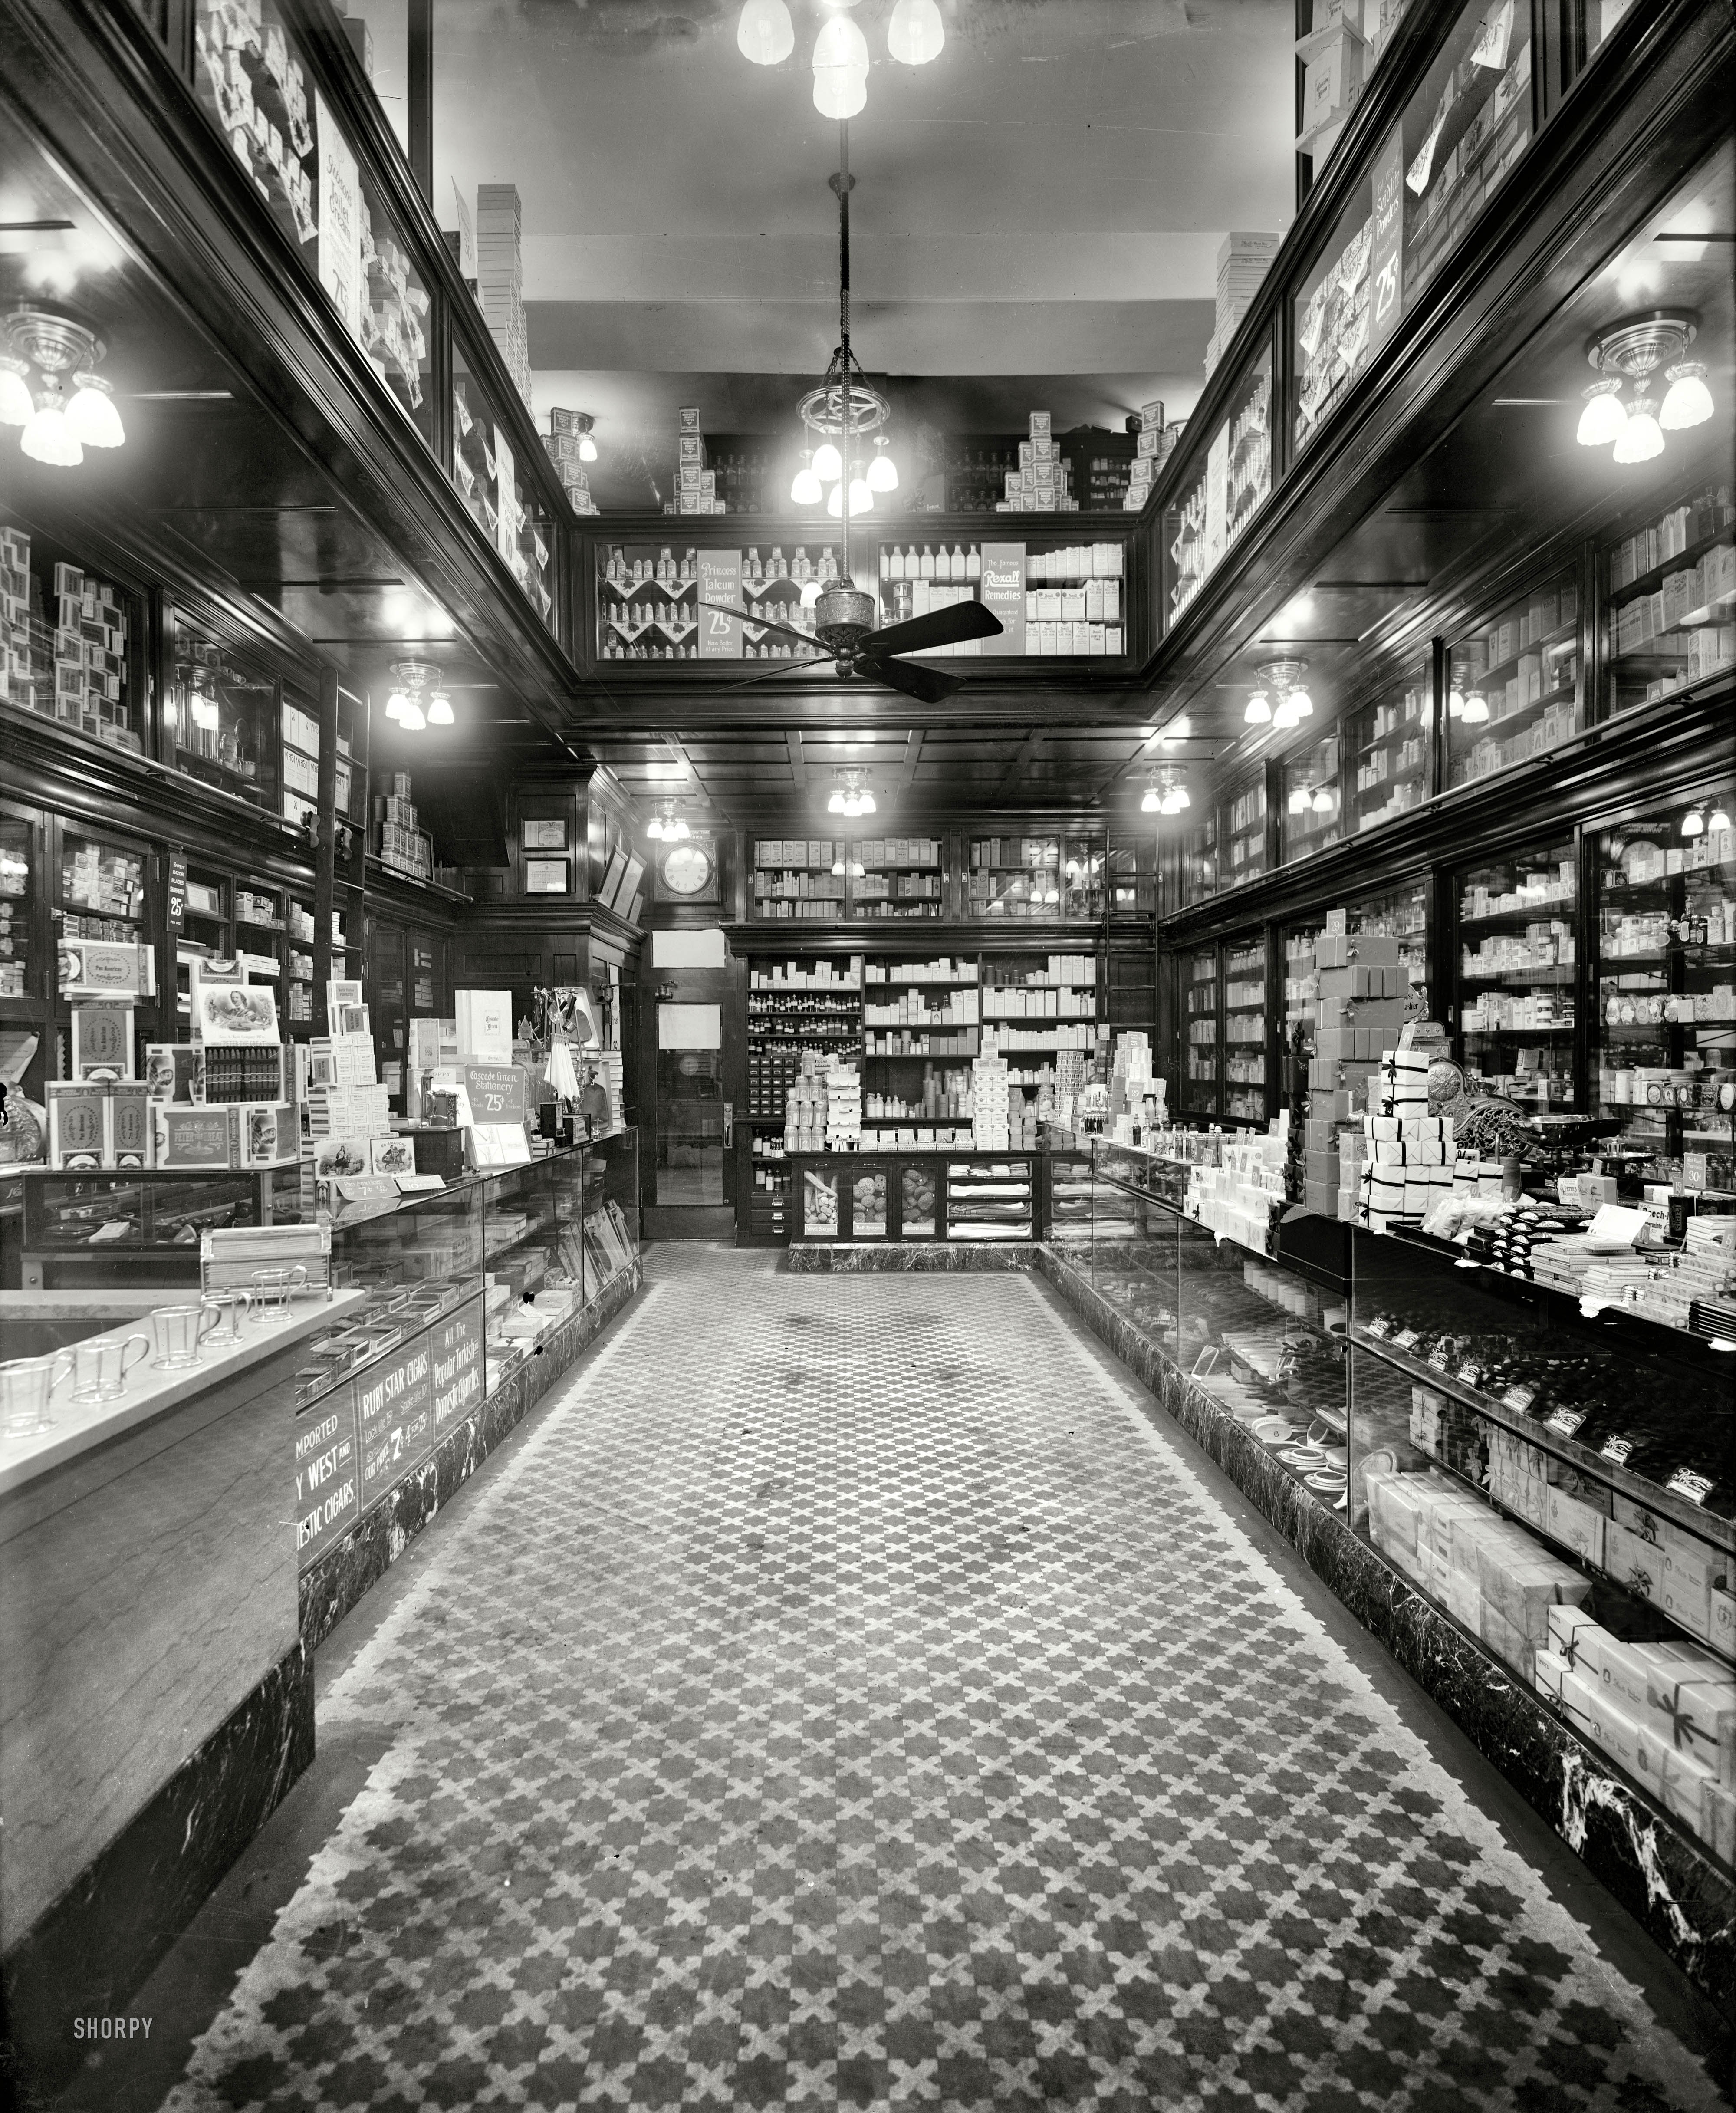 1913. No location given. "G.W. Armstrong drugstore." Seidlitz Powders only 25 cents. 8x10 glass negative, Detroit Publishing Company. View full size.